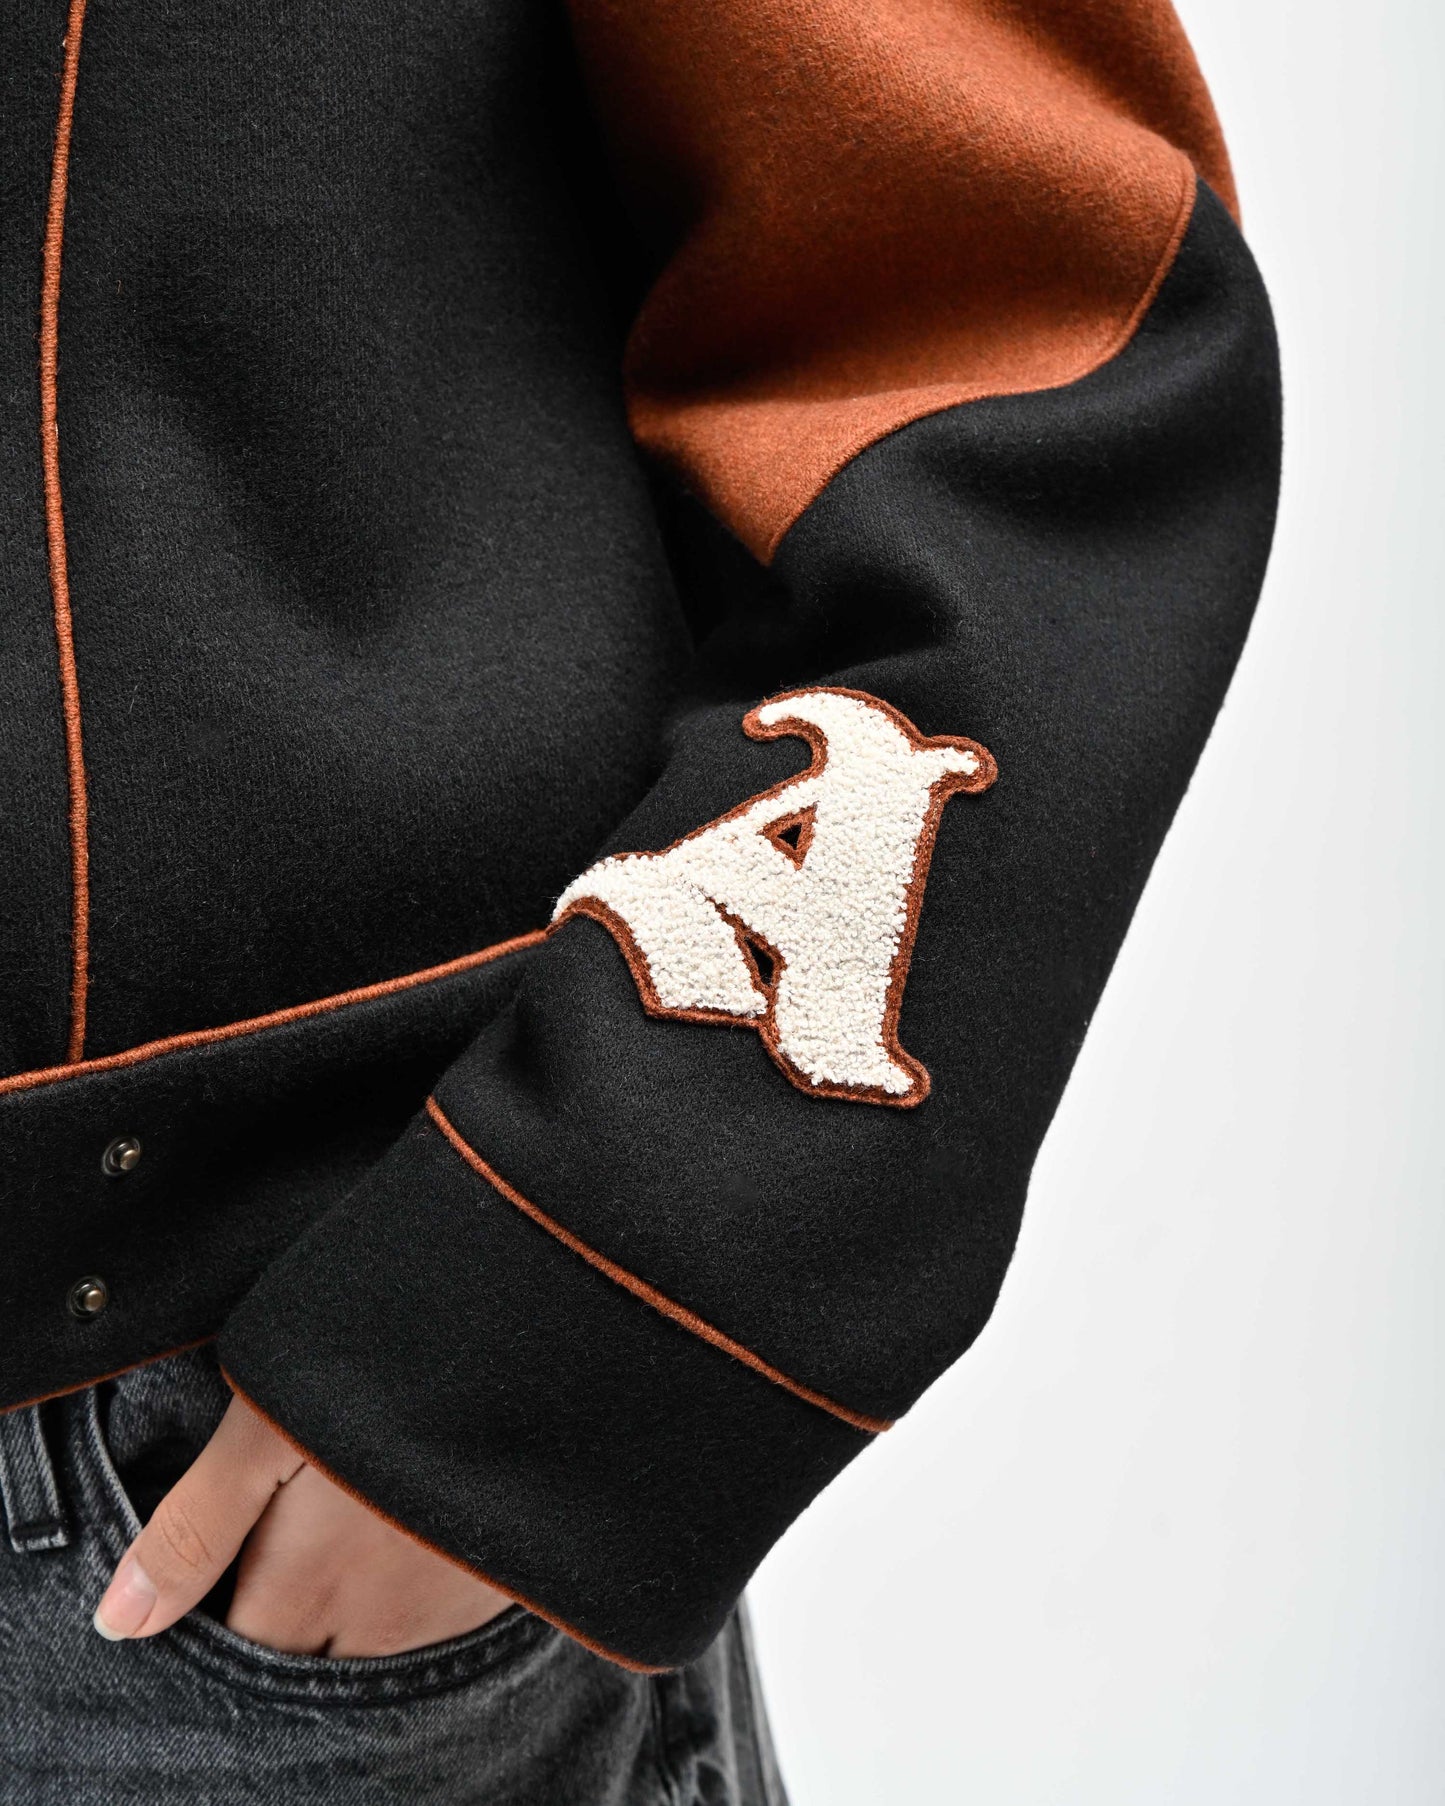 Detail View of Chenille Signature 'A' Letter and Piping on Rue Varsity Jacket by Aseye Studio